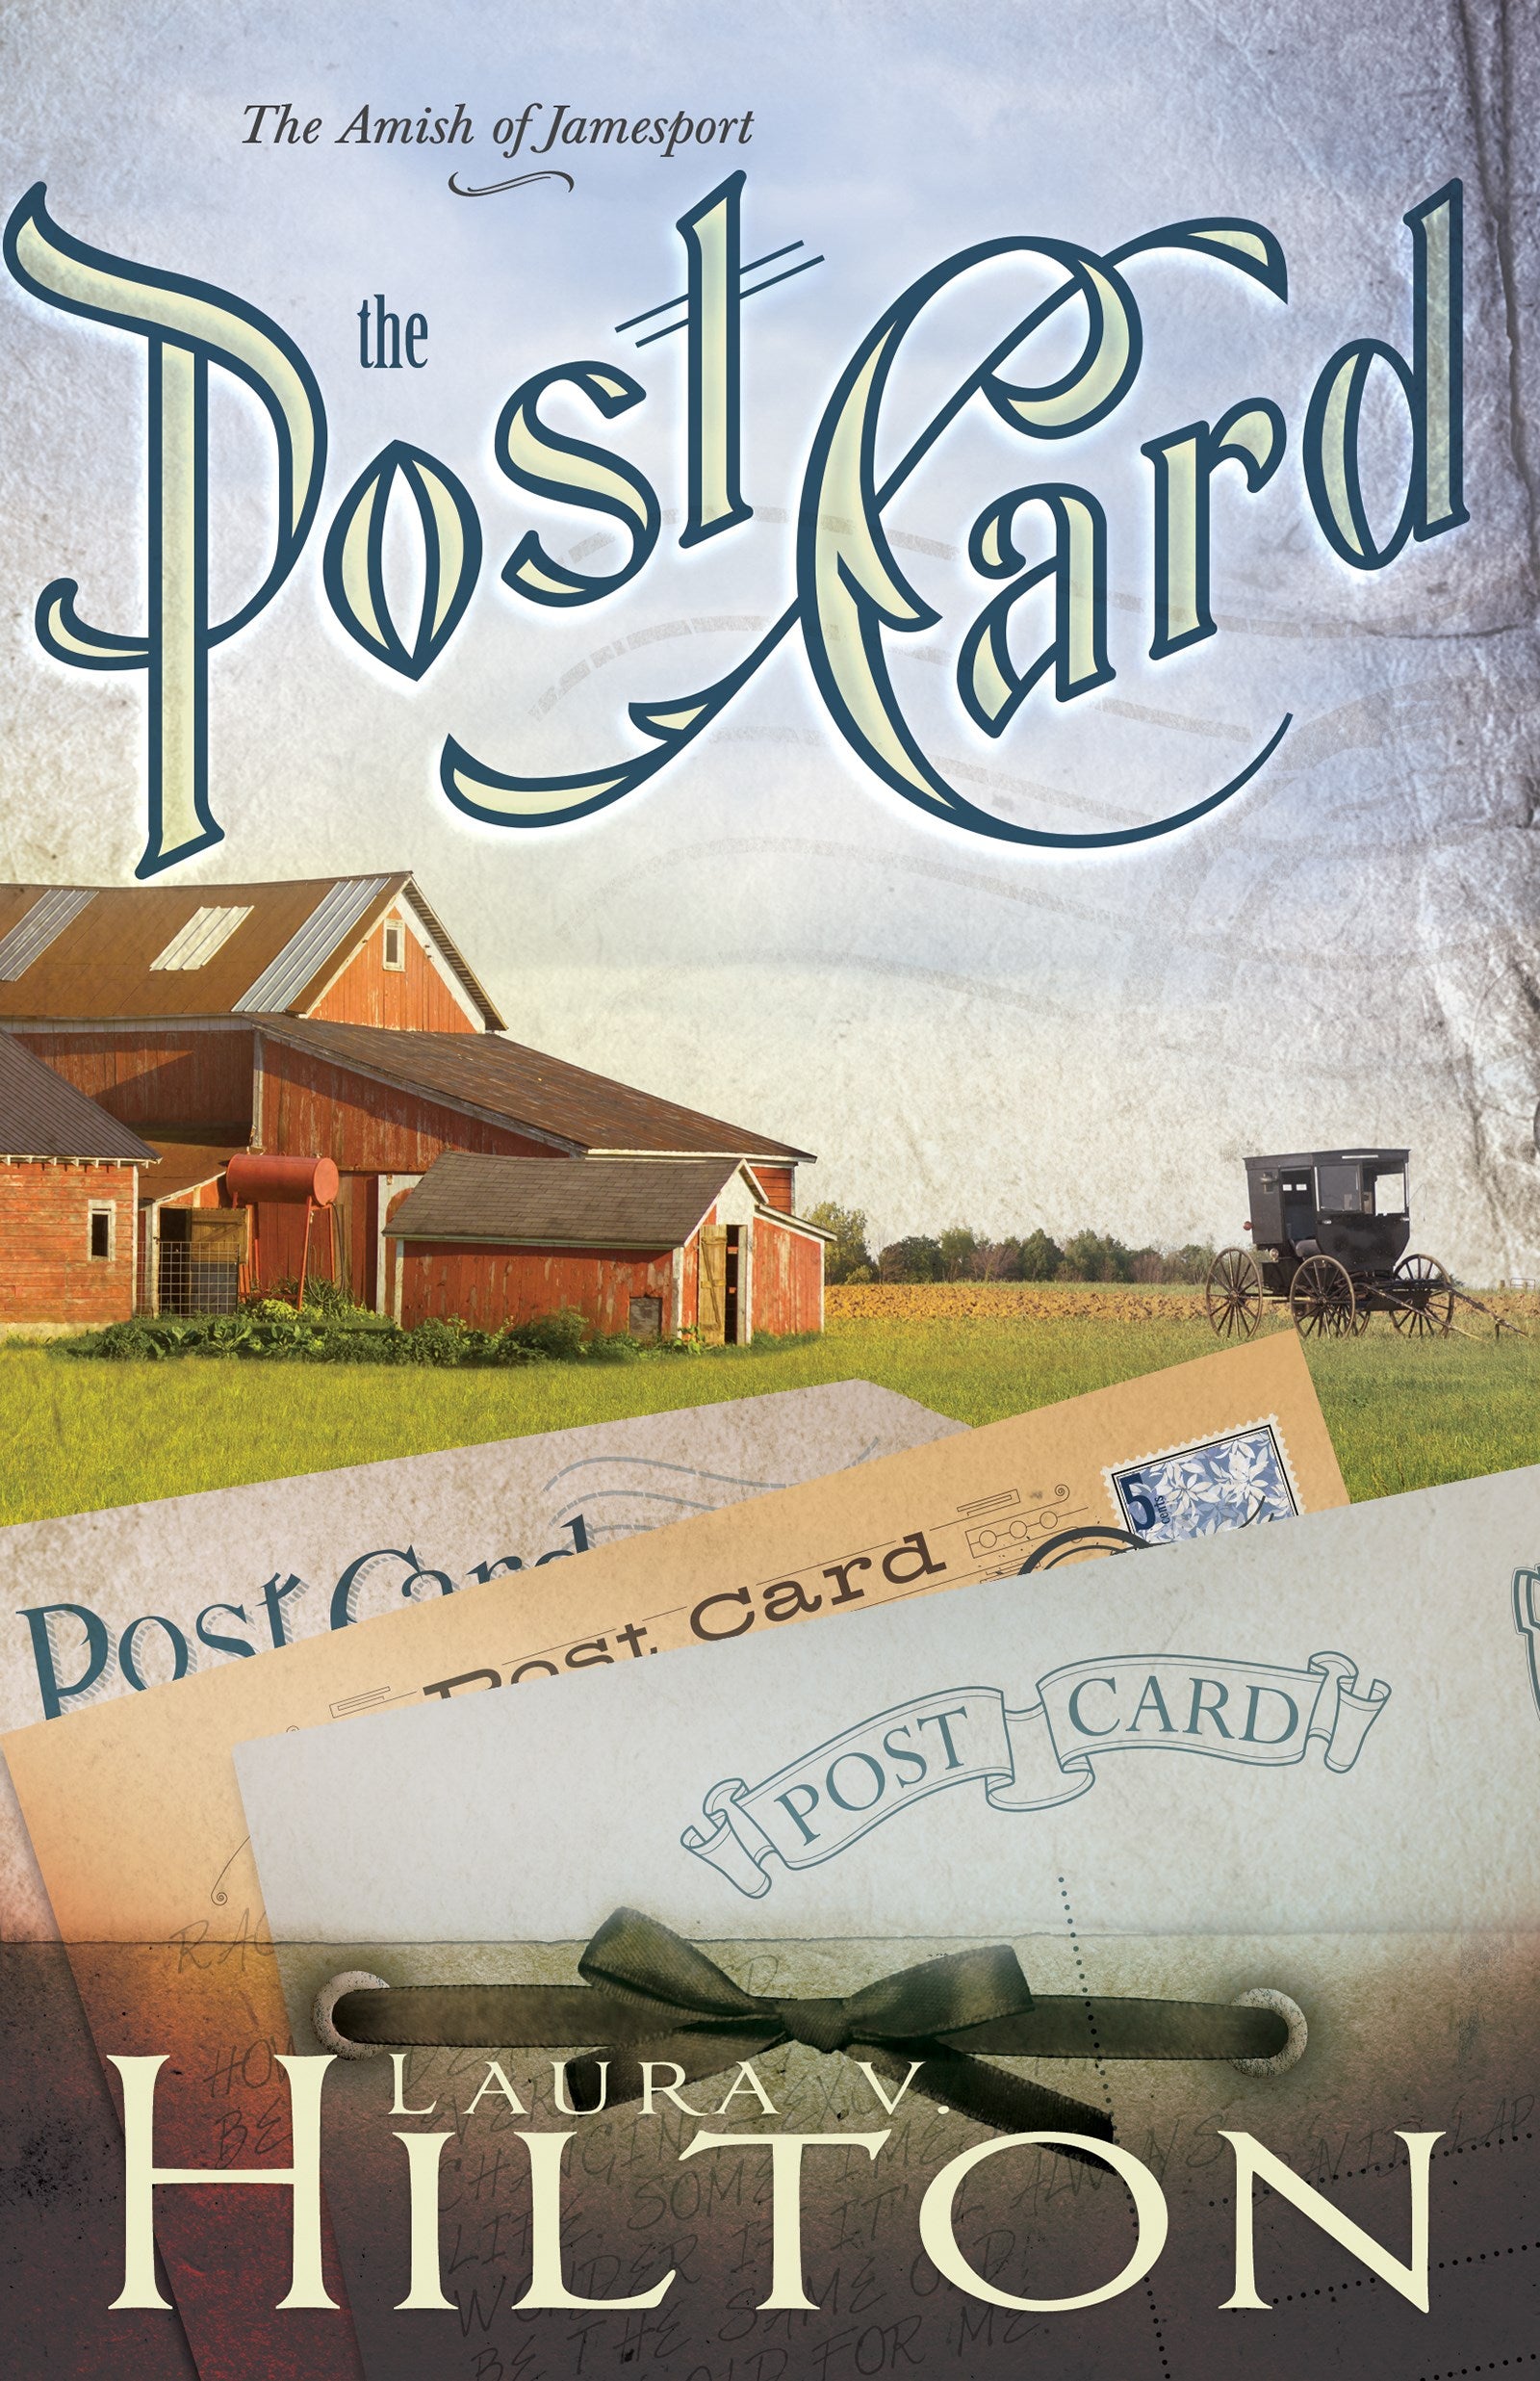 Seed of Abraham Christian Bookstore - (In)Courage - Postcard (Amish of Jamesport V2)